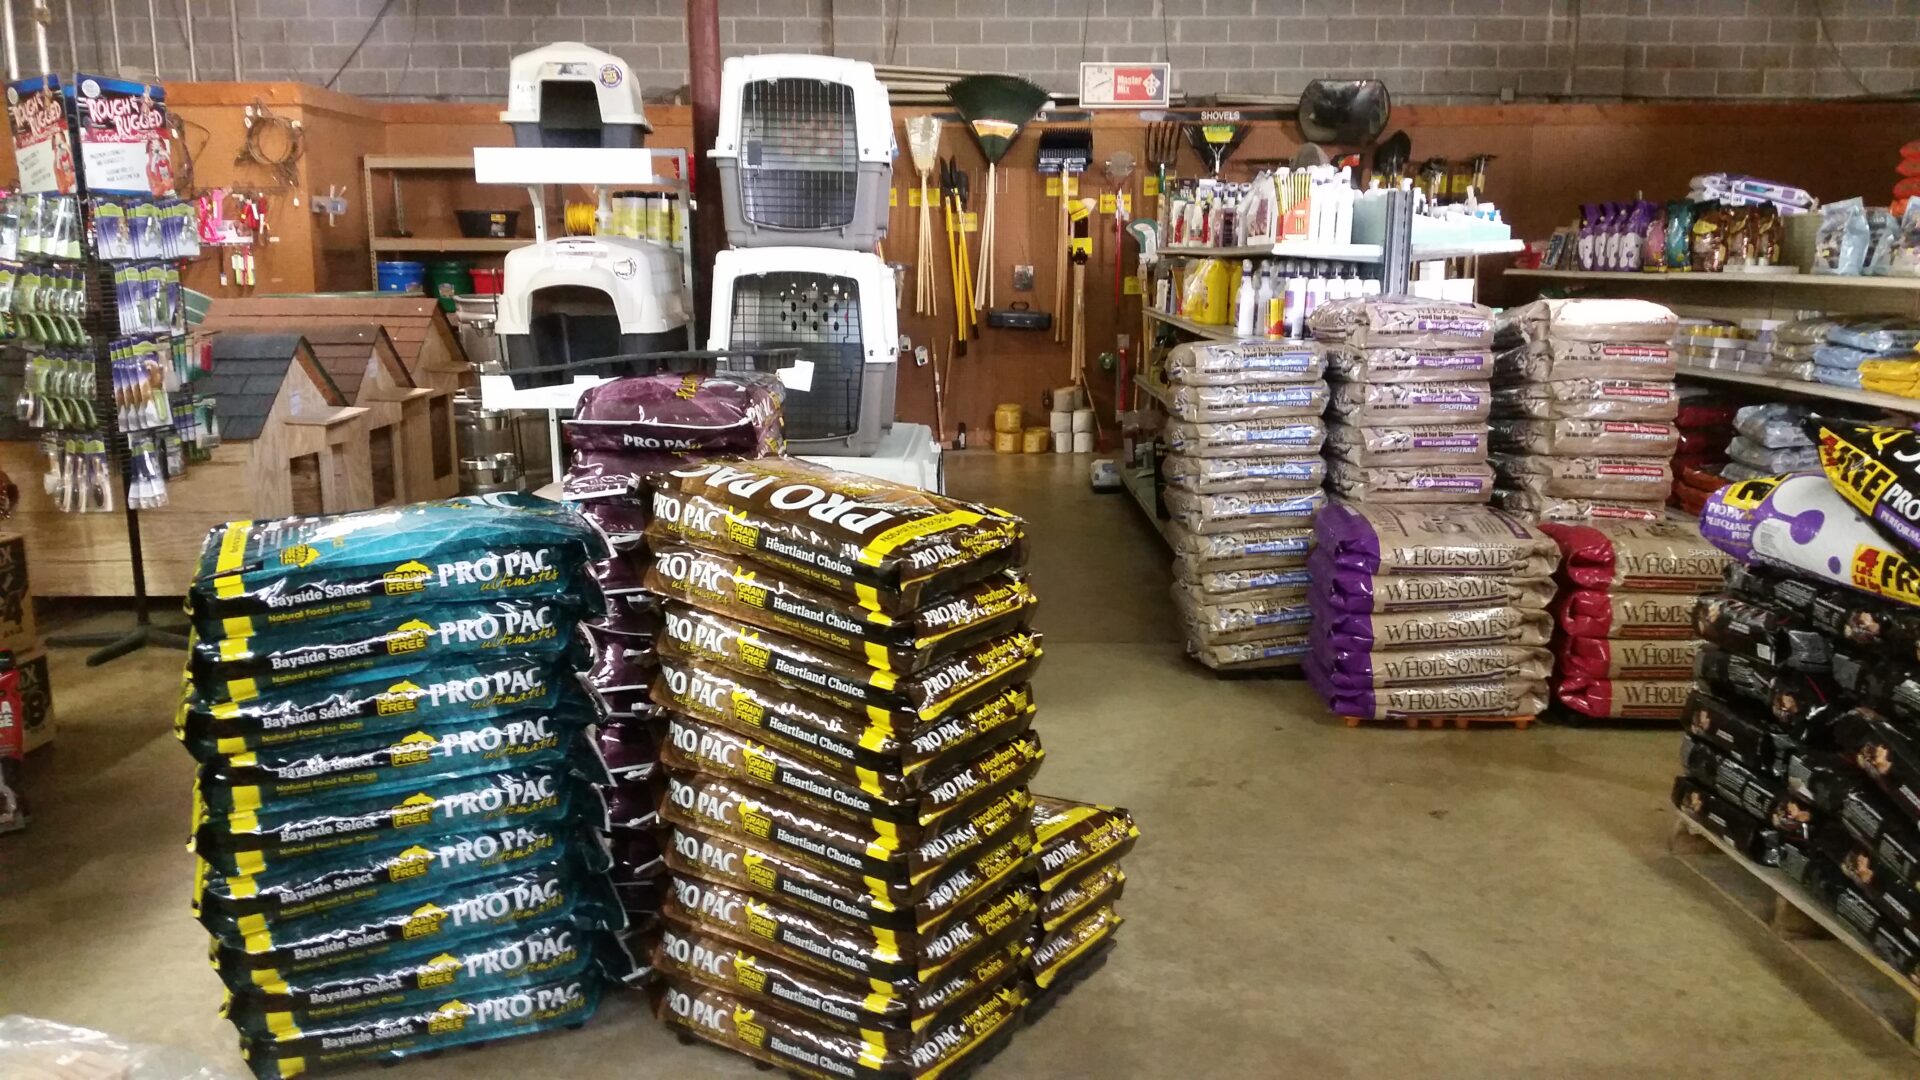 standard-feed-and-seed-dog-food-and-supplies